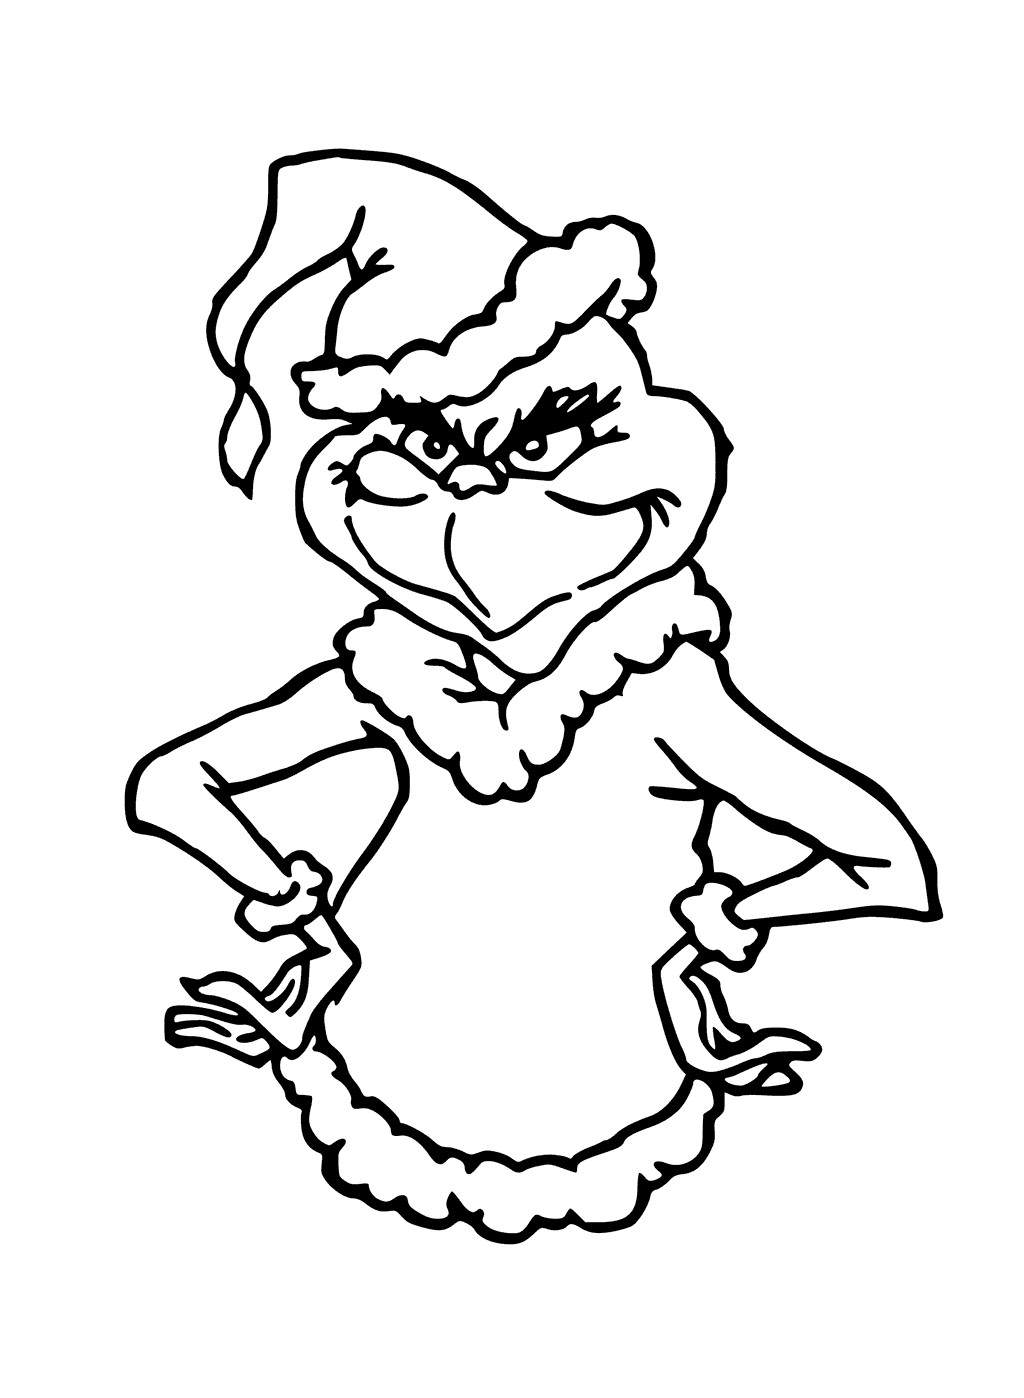 Grinch Coloring Pages Free Black and White - Free Printable Coloring Pages